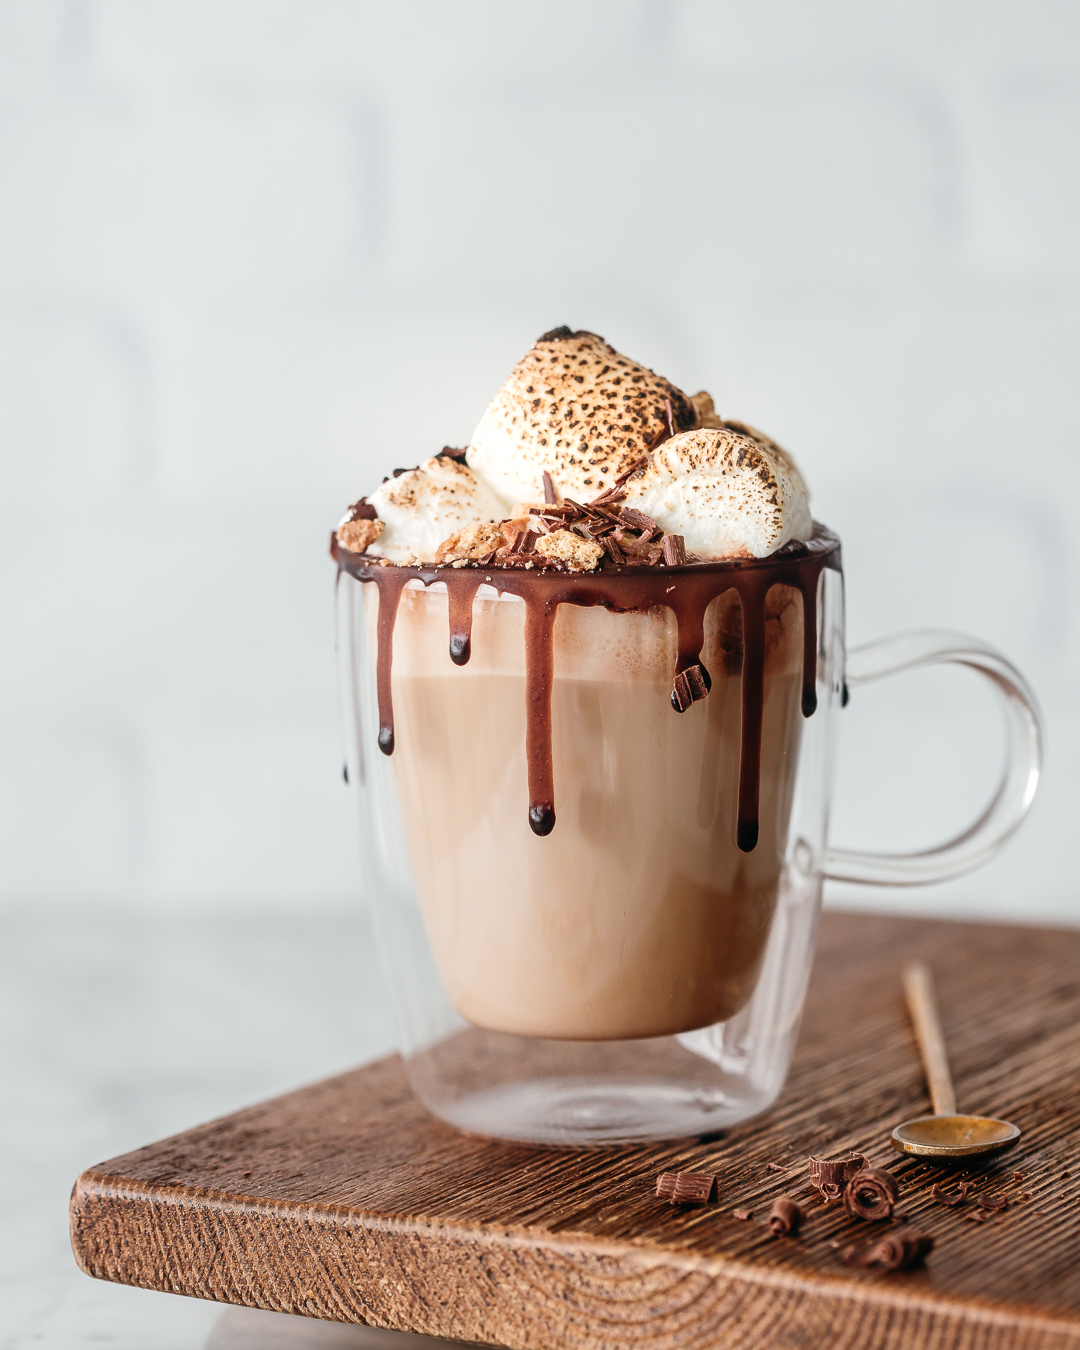 S'mores latte with toasted marshmallows and chocolate syrup